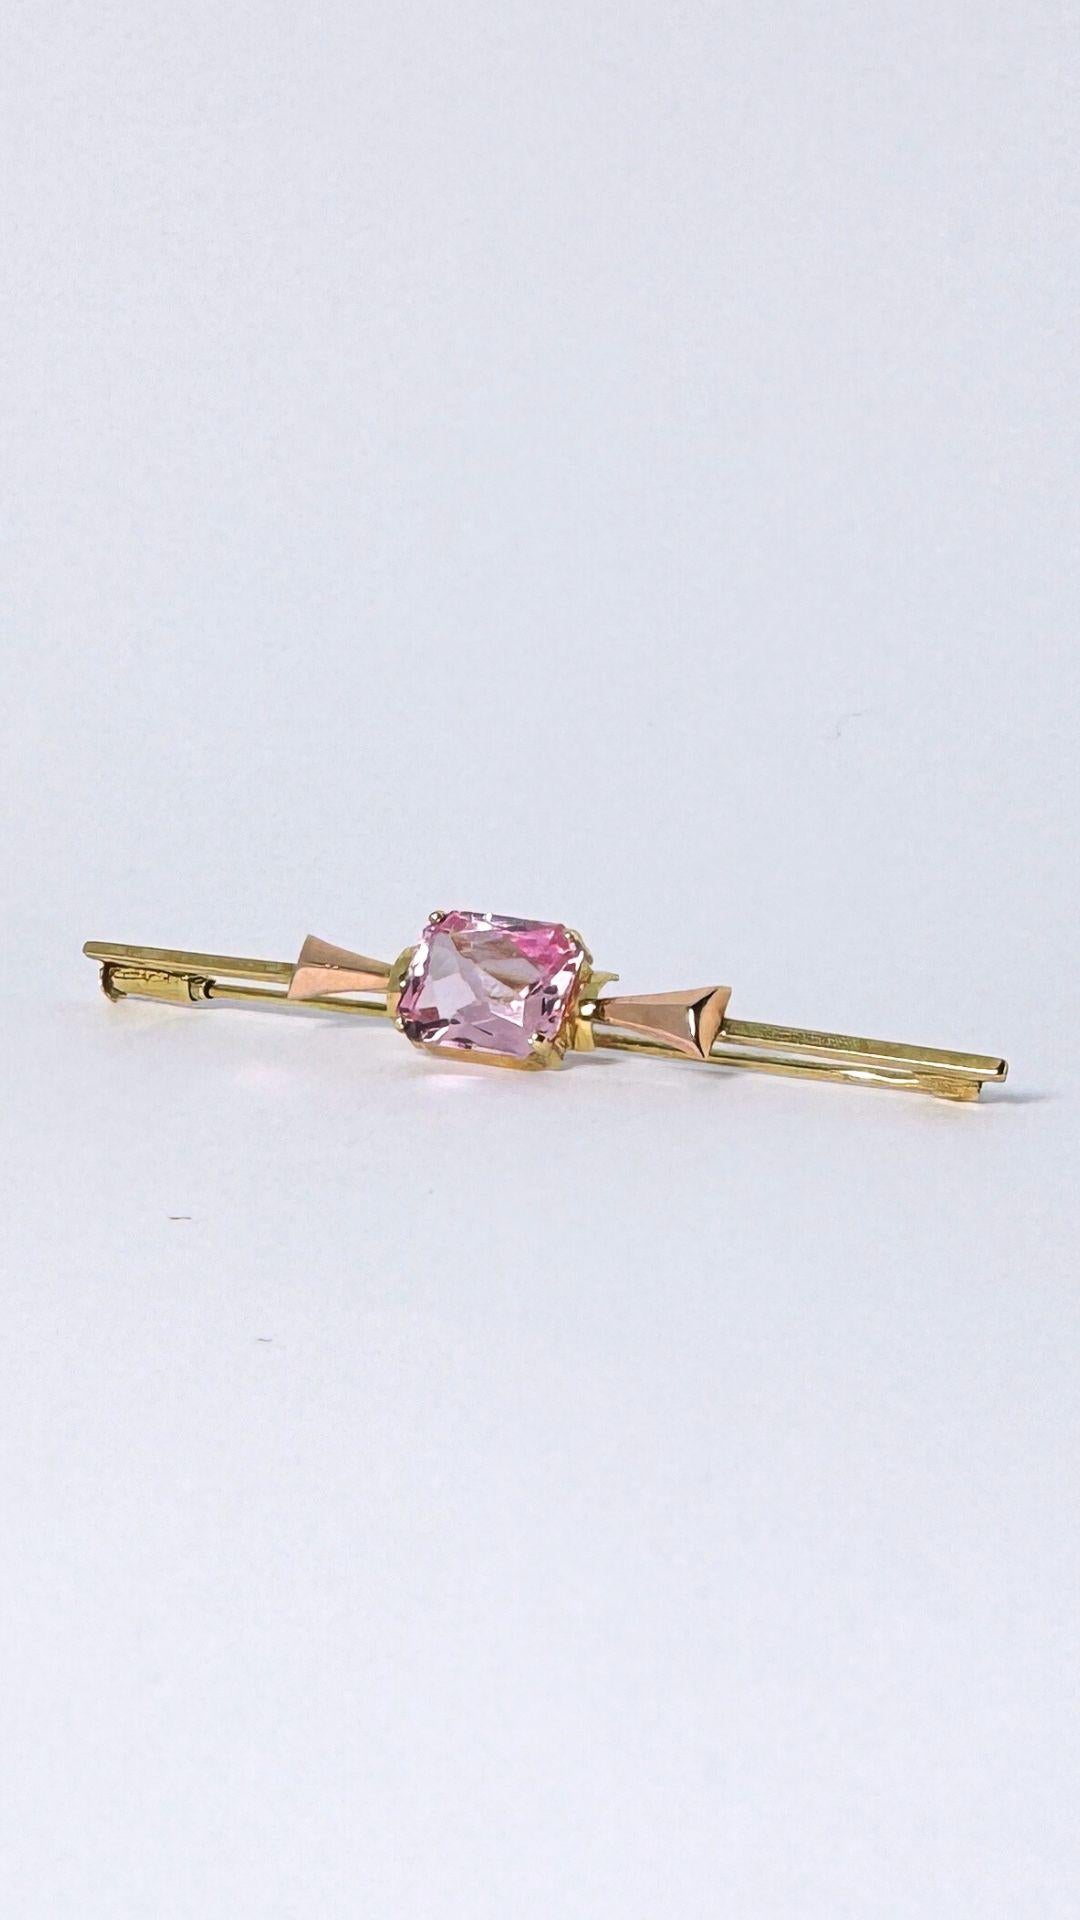 This vintage pin with an European origine, is from the 1960's and is made of 14 carat yellow gold. This pre-loved jewel is set in with an emerald faceted Rose de France, which belongs to the amethyst family. Look at this stunning and enchanting